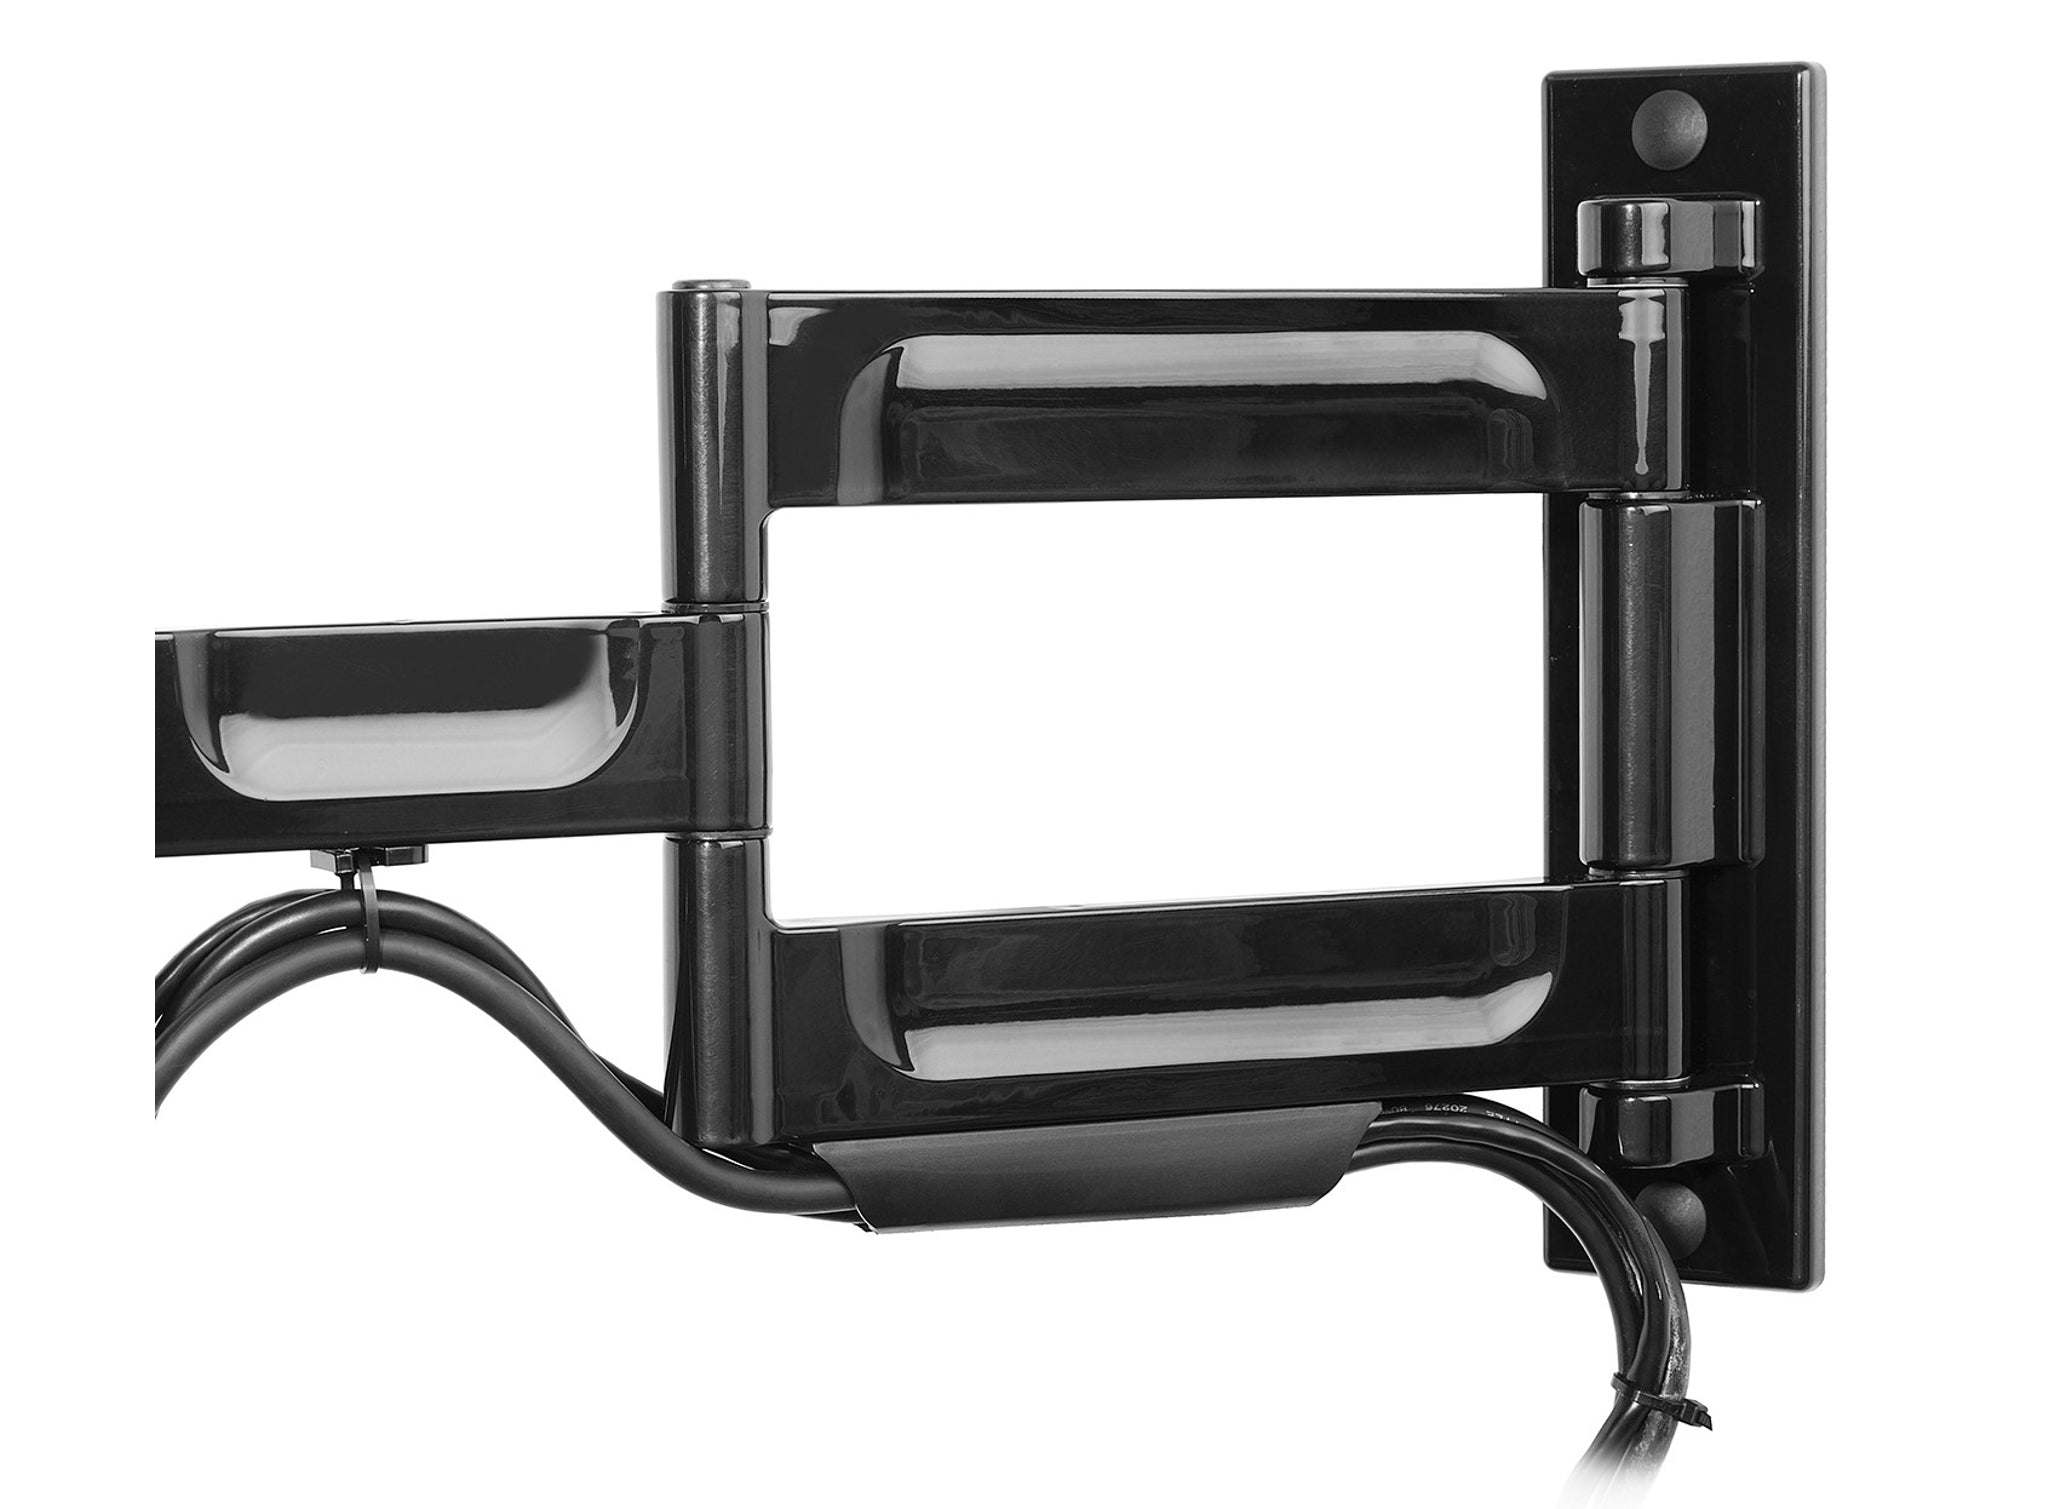 Peerless-AV PA740 - Paramount™ wall mount with articulated arm - 22-40 inch - VESA 200x200 mm - up to 36 kg - Black